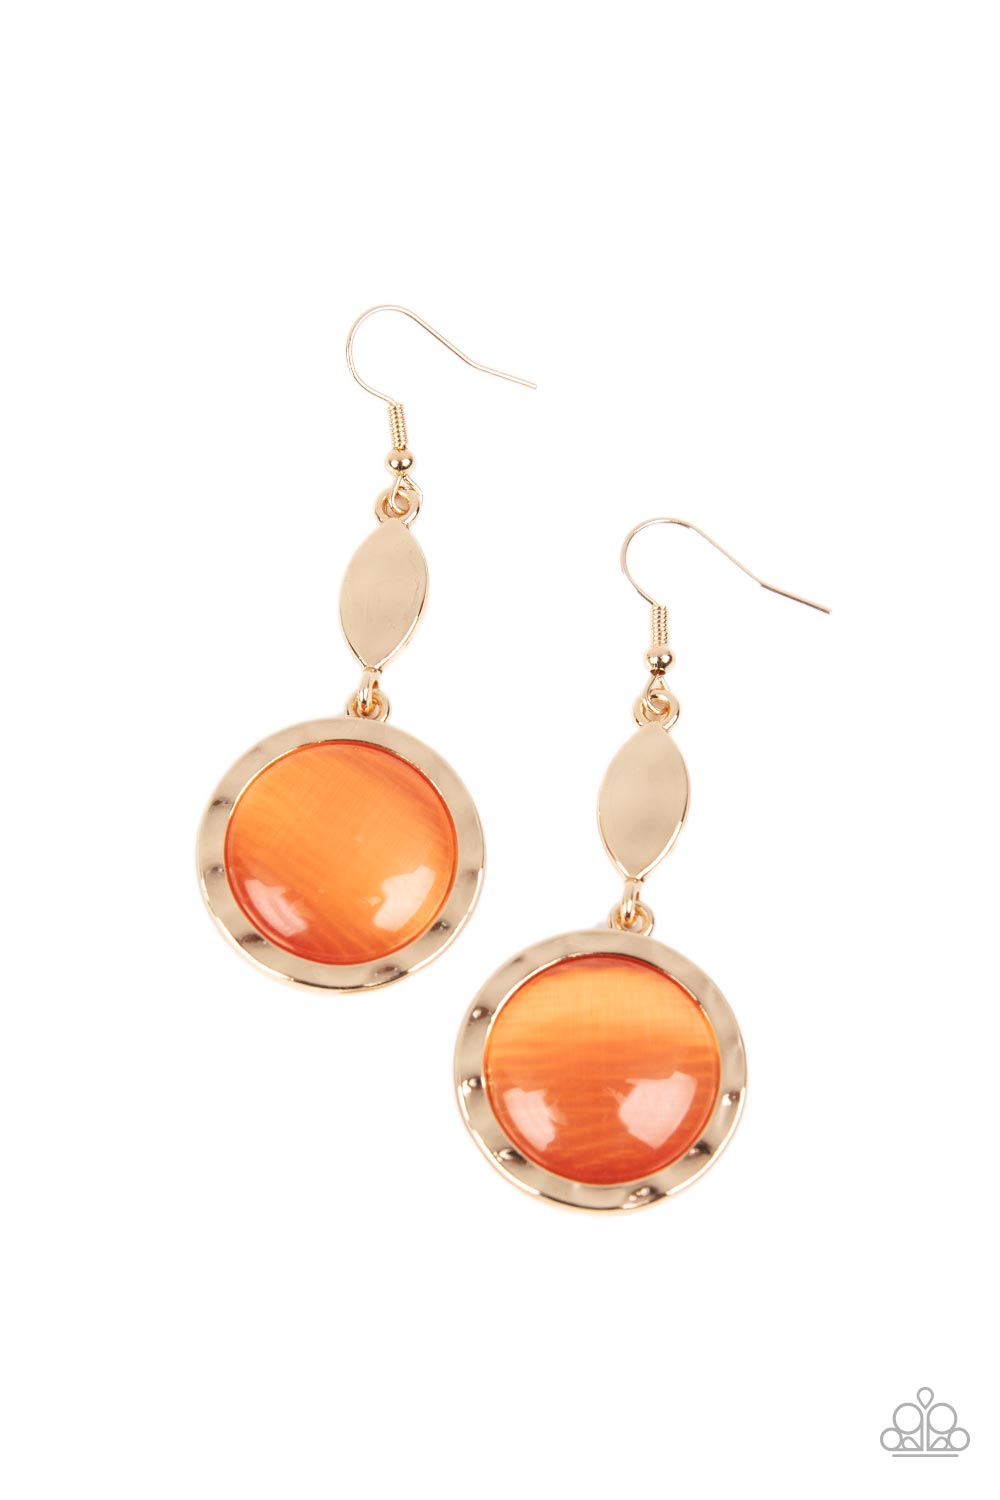 Earring - Magically Magnificent - Orange